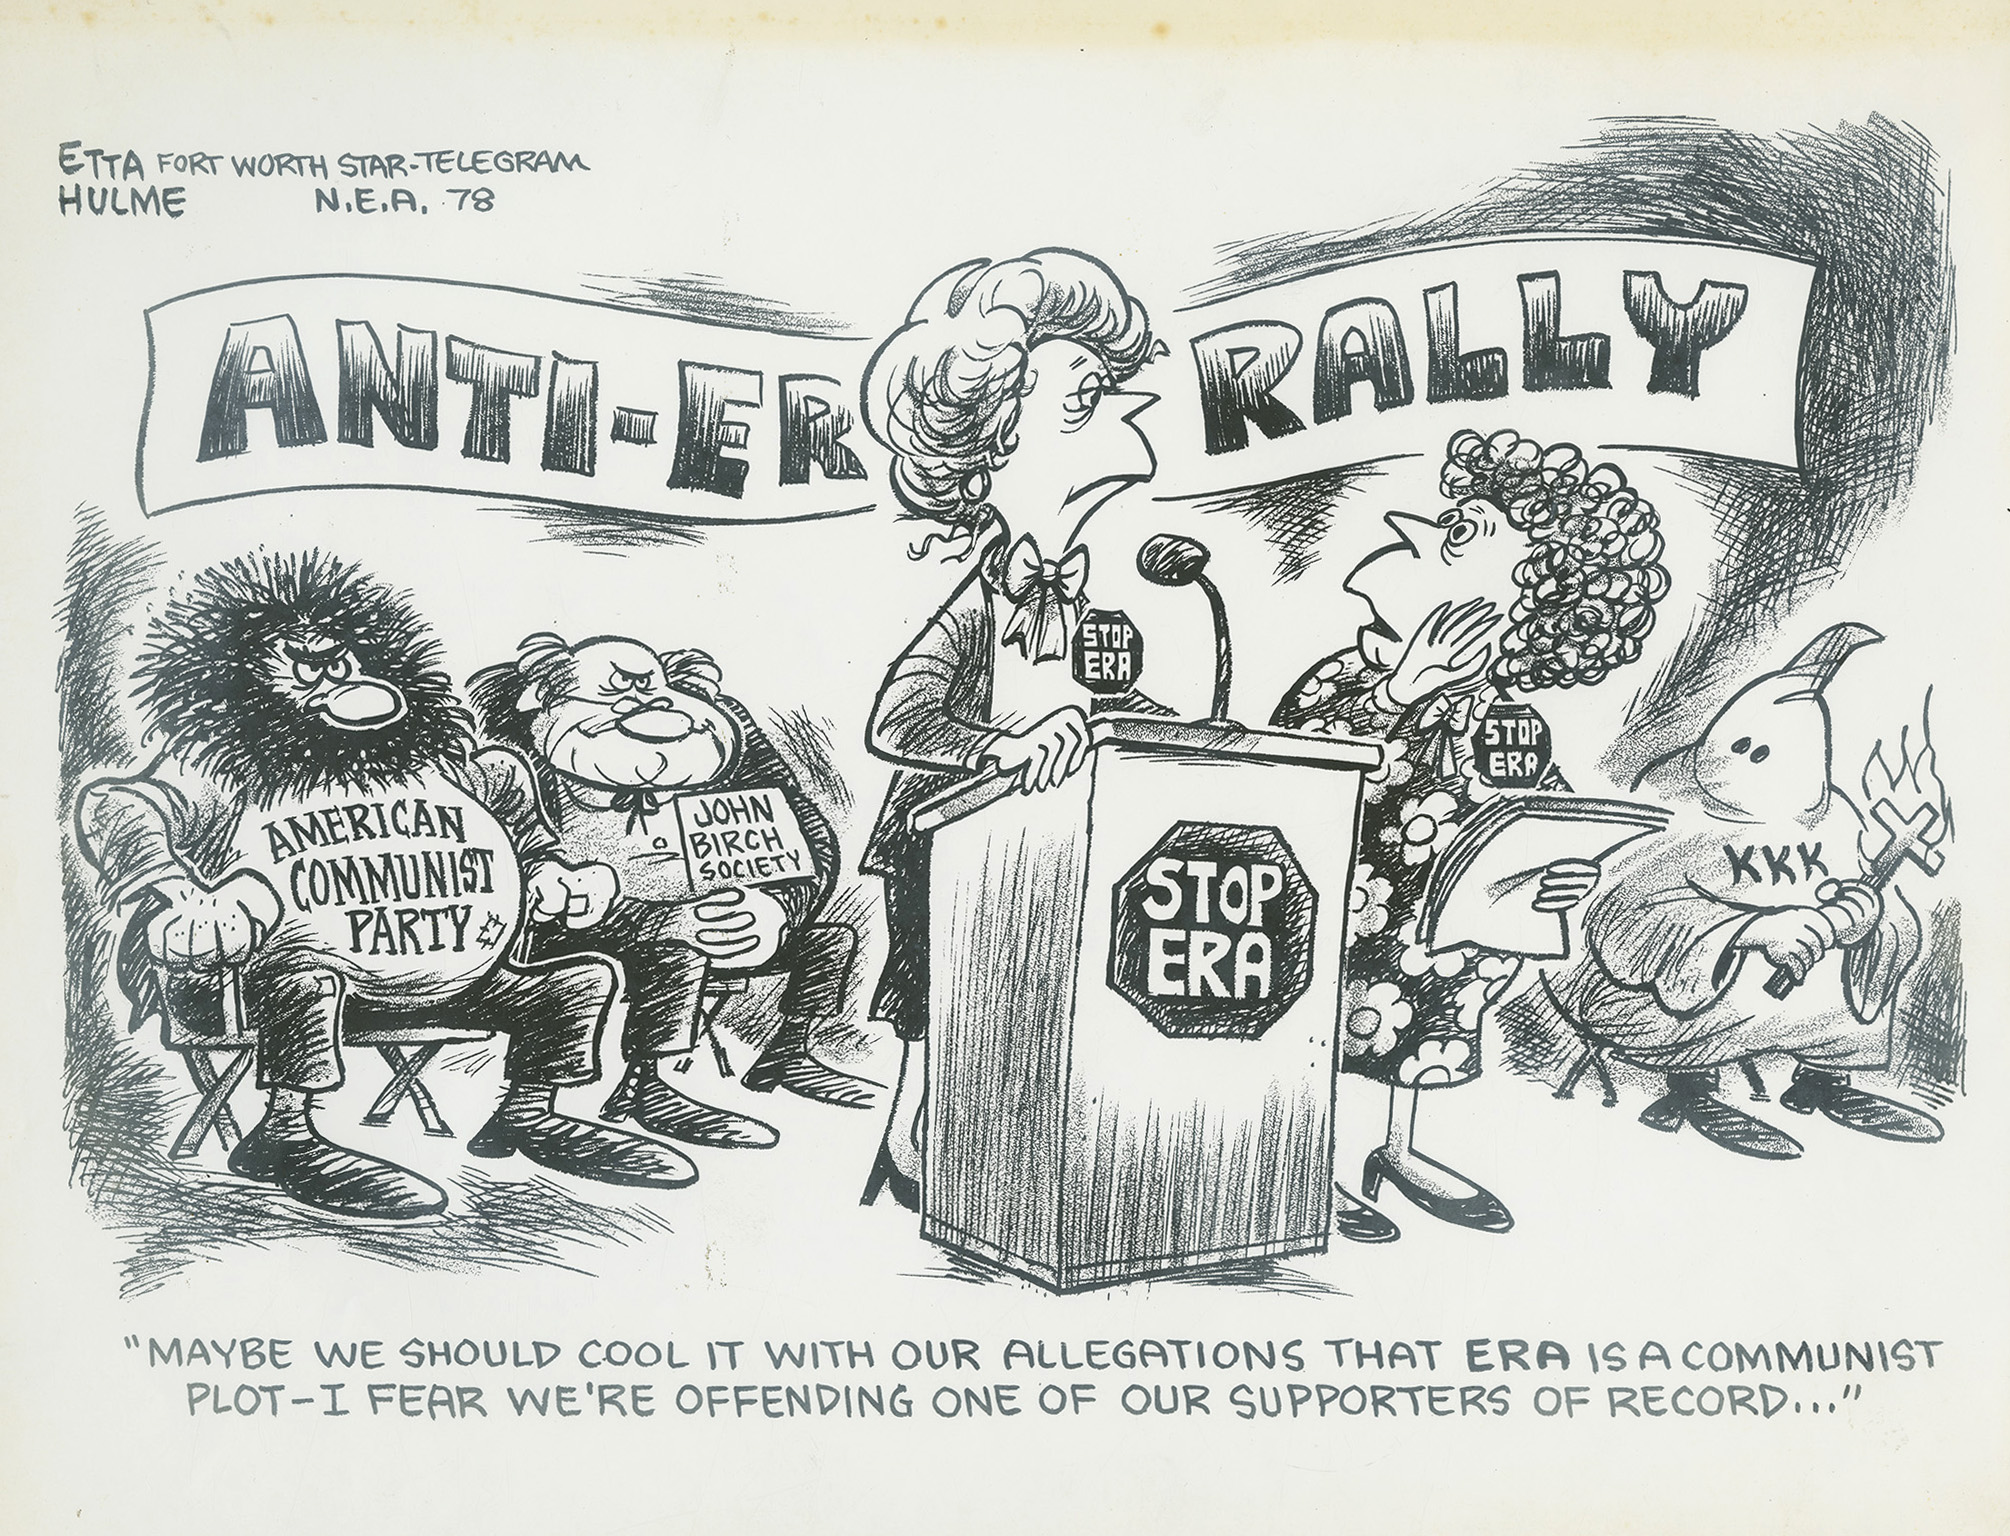 Editorial cartoon by Etta Hulme (1978) depicting an Anti-Equal Rights Amendment (ERA) rally. Visible onstage are members of the KKK, the American Communist Party, and the John Birch Society